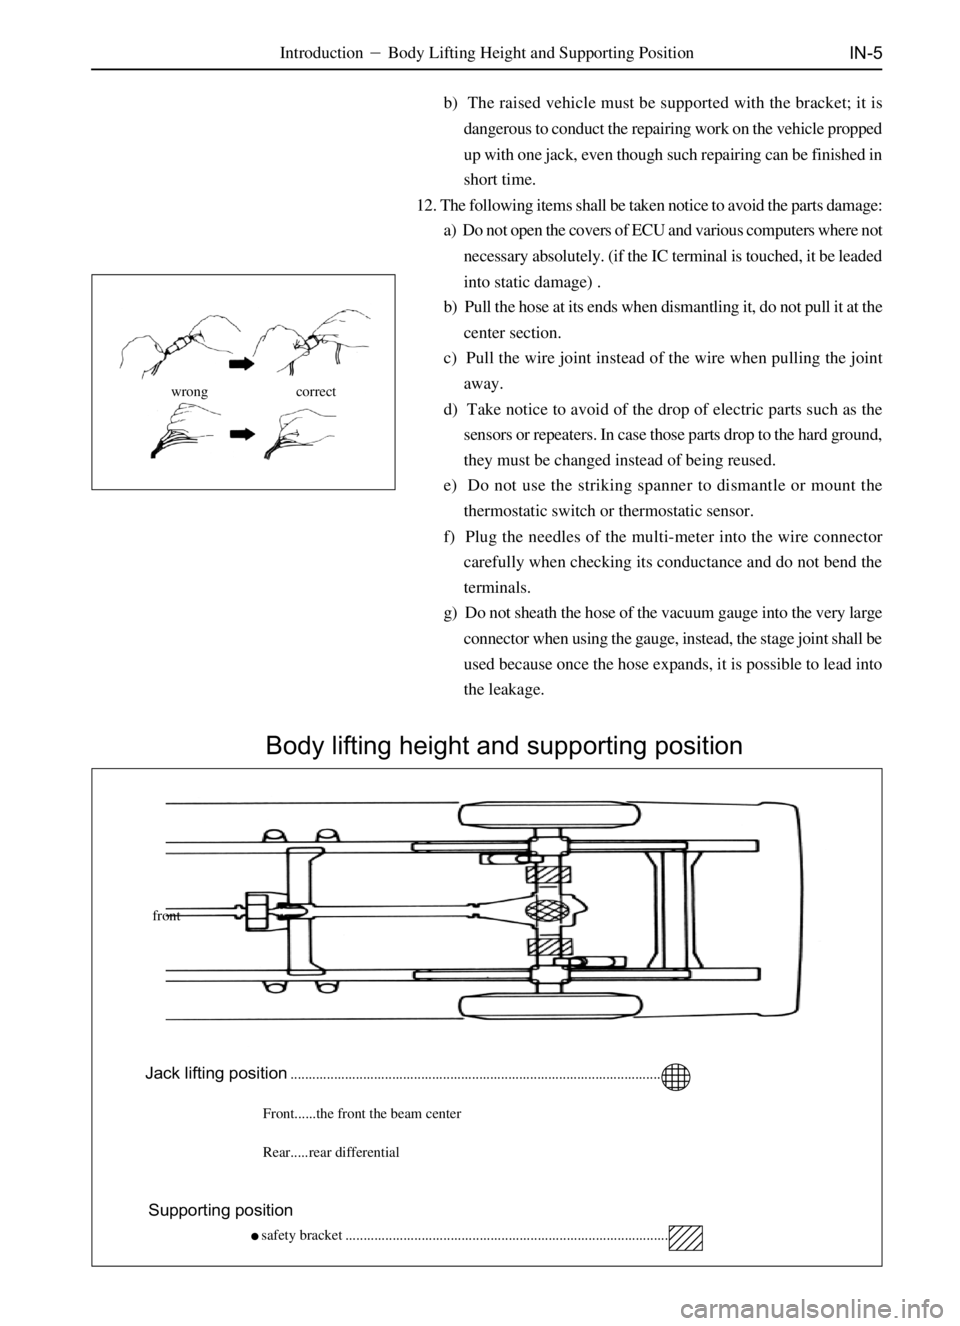 GREAT WALL SAFE 2006  Service Manual IN-5
     Body lifting height and supporting position
wrong correct
IntroductionBody Lifting Height and Supporting Position
Jack lifting position
.....................................................